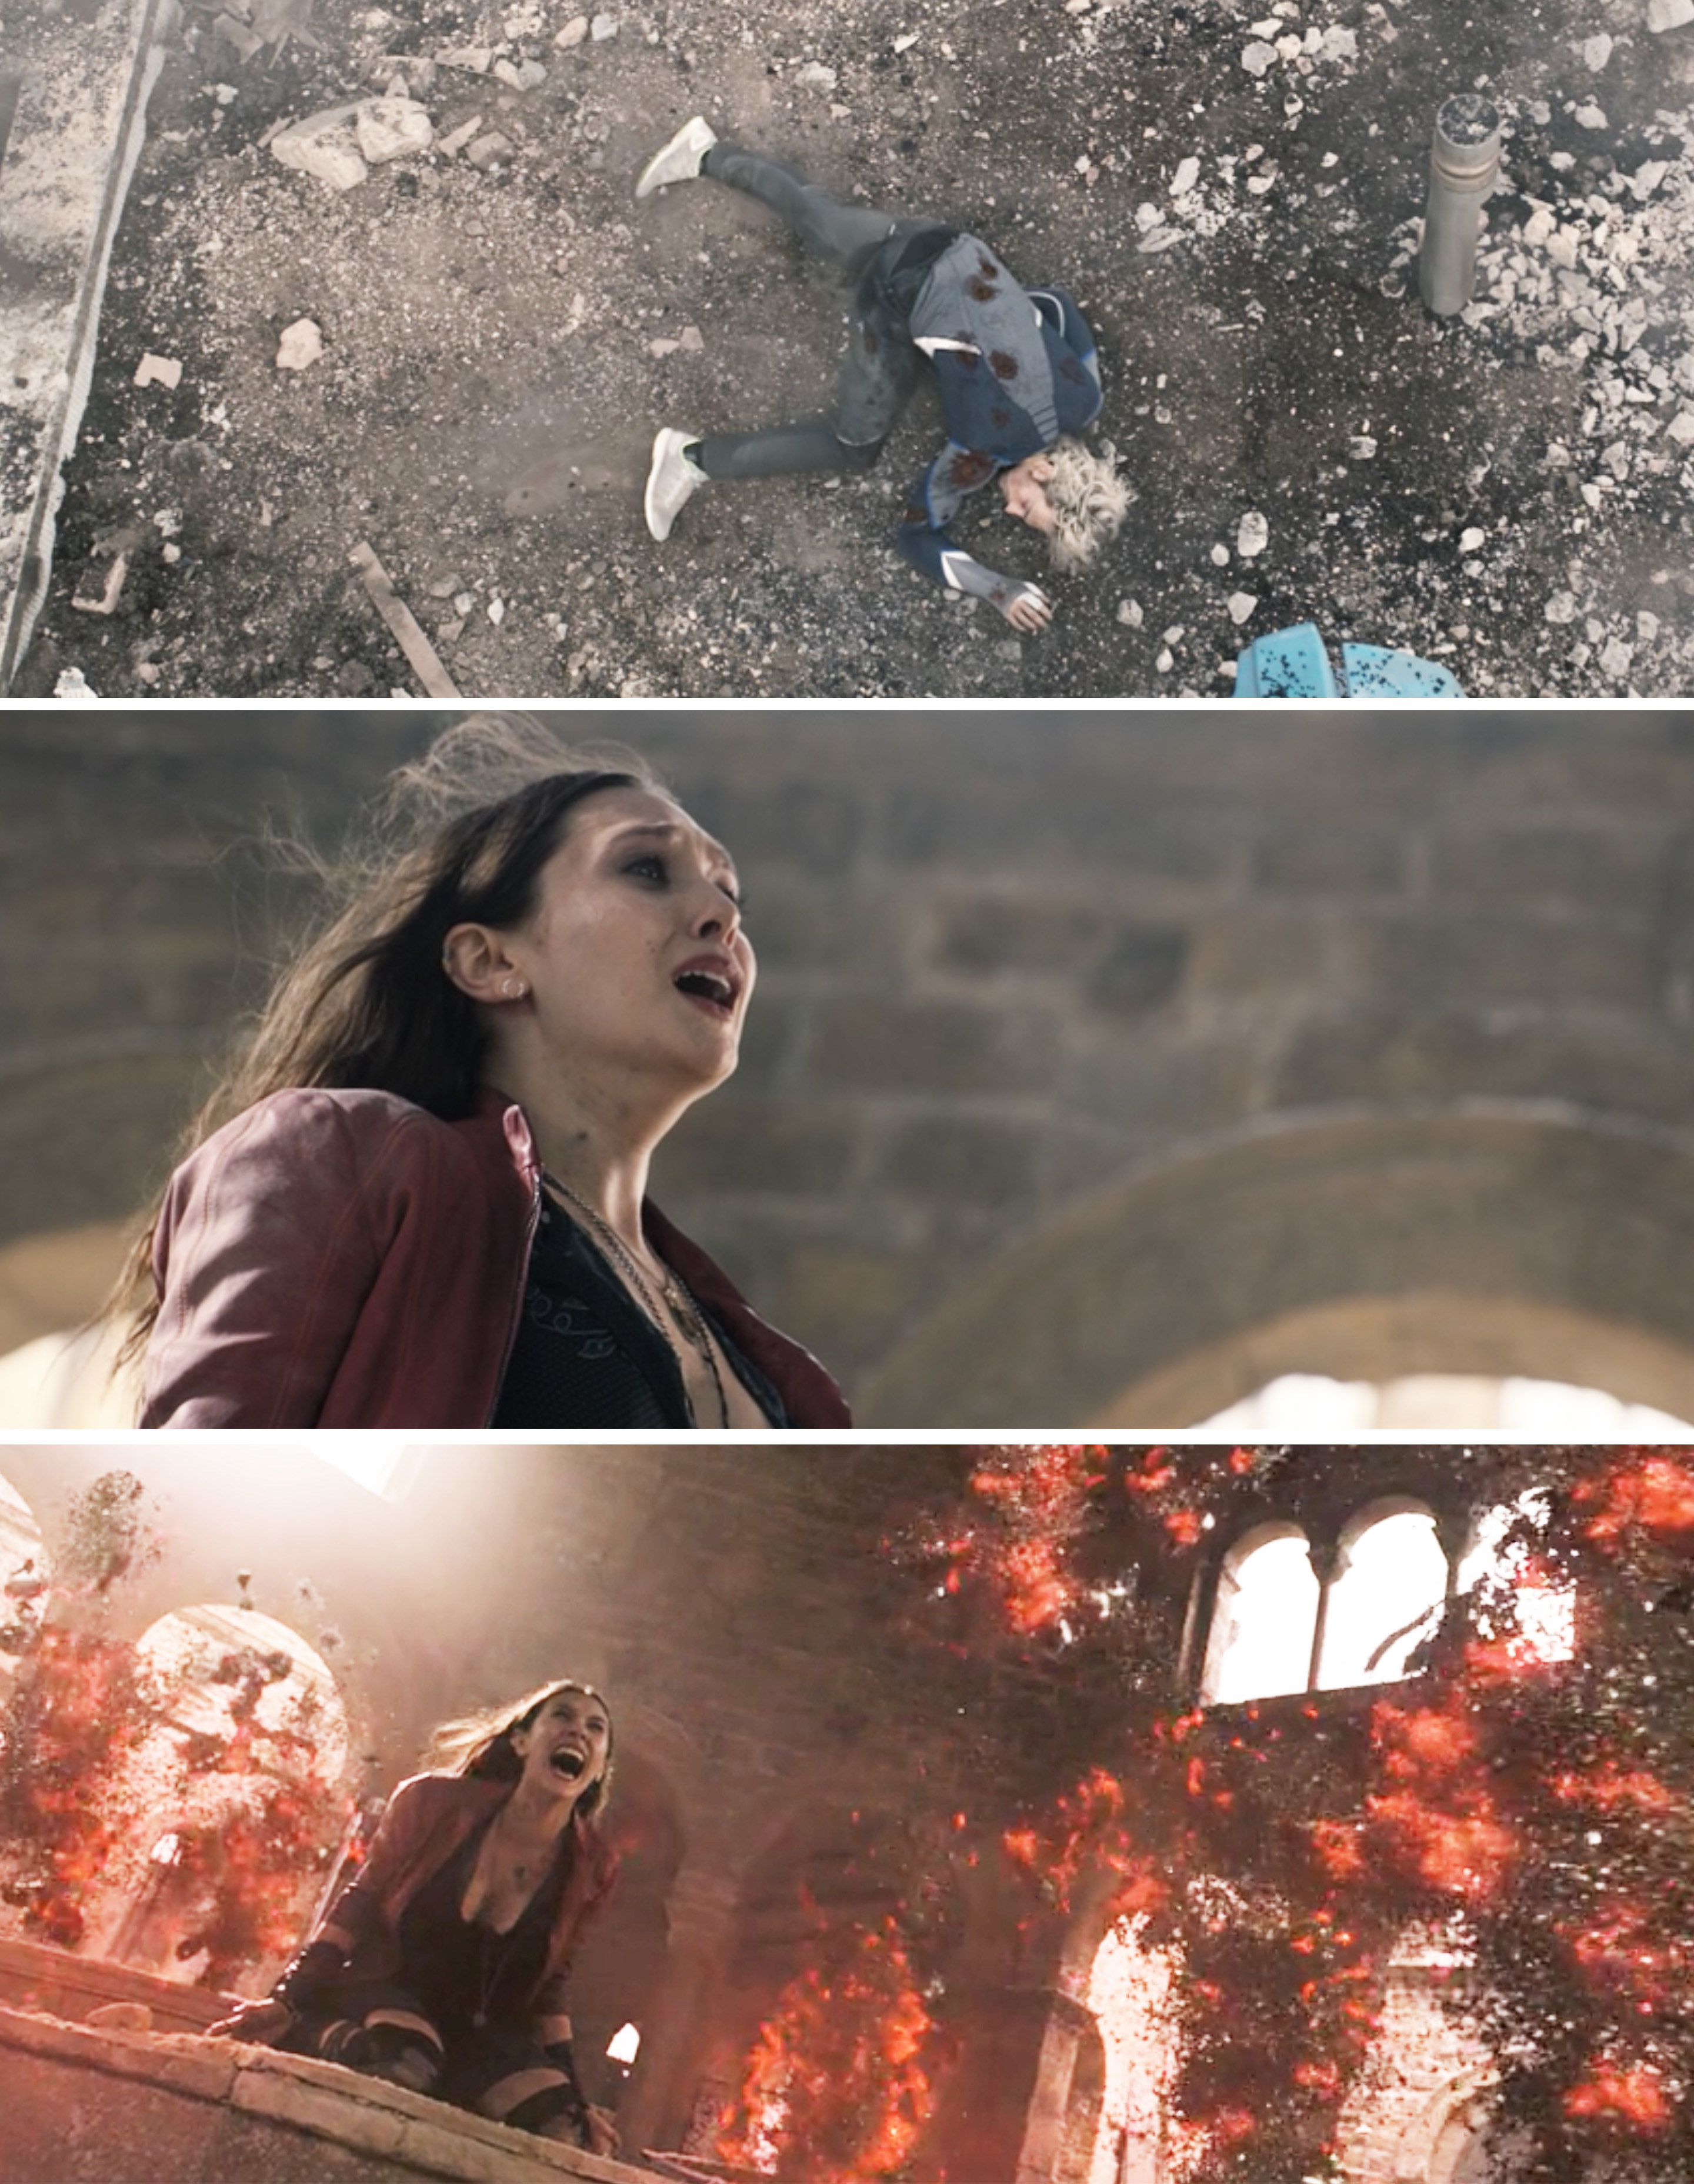 Wanda dropping to her knees, crying, and emitting her power